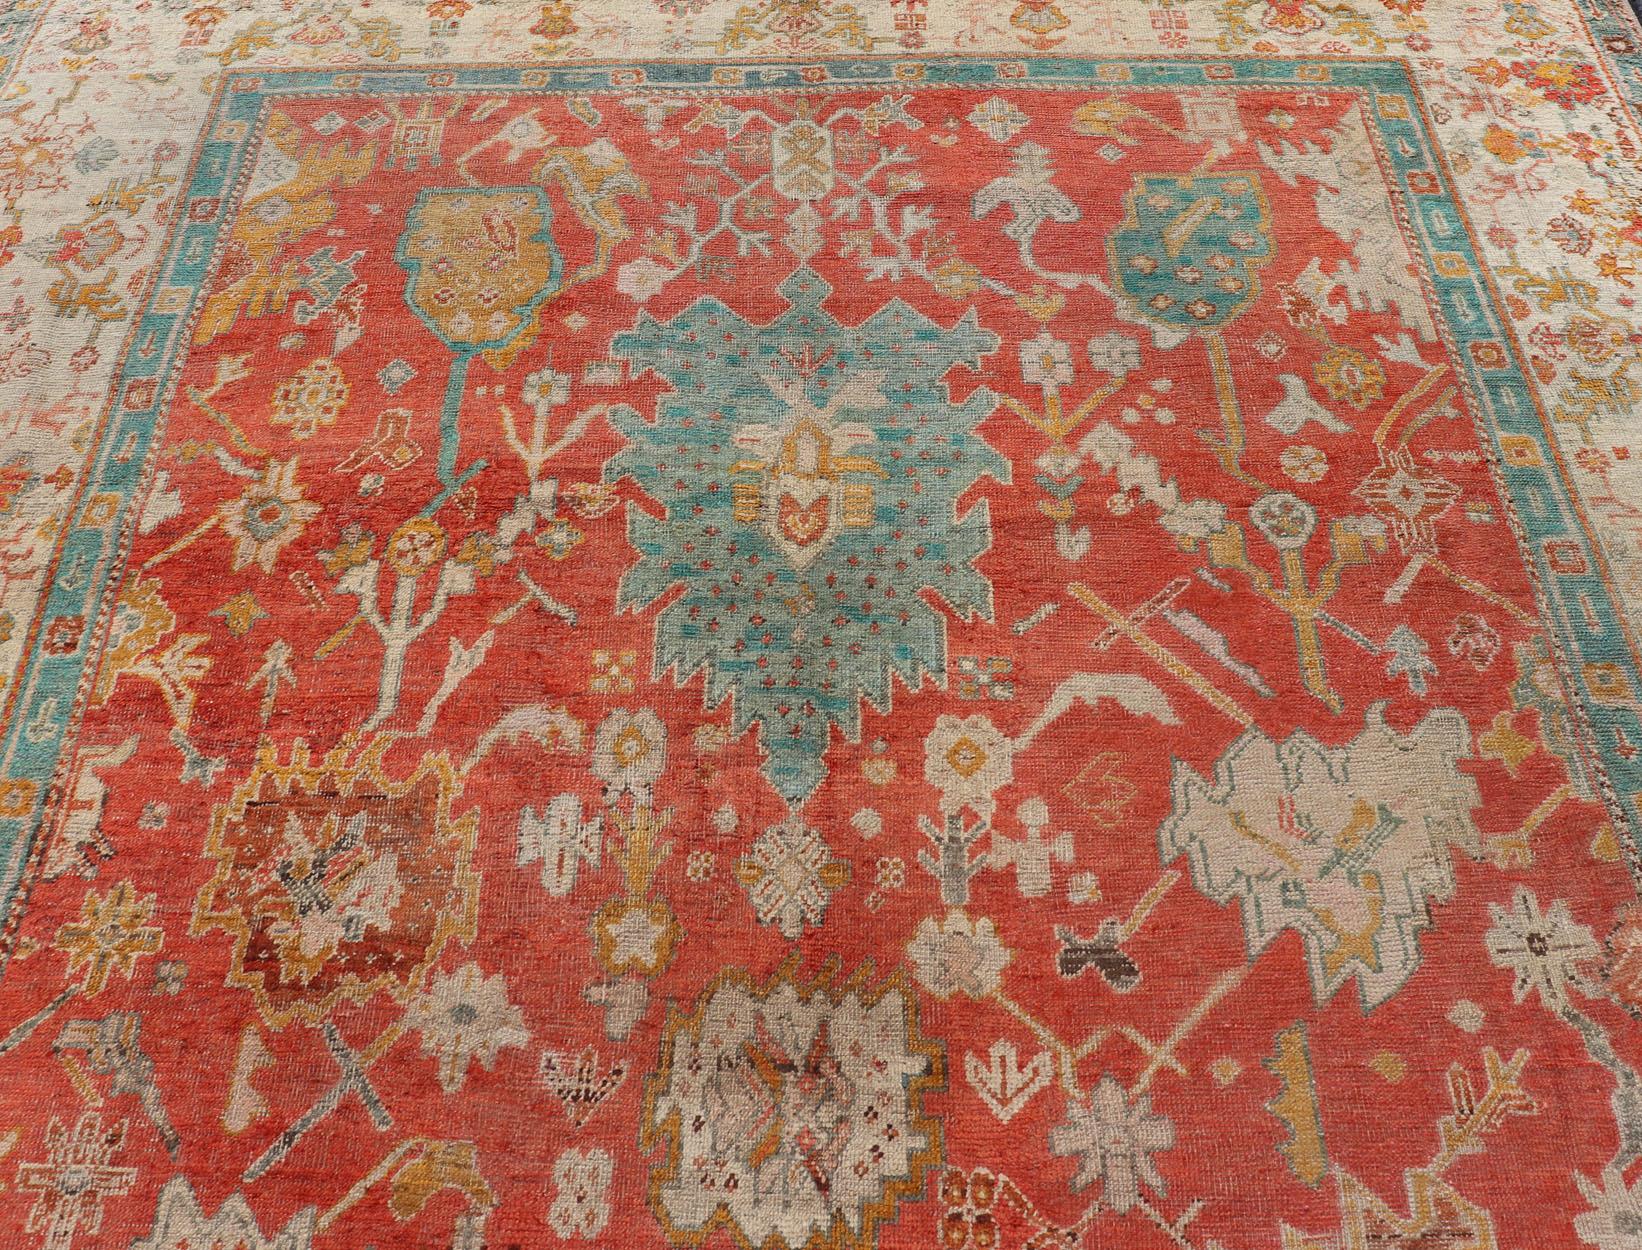 Antique Turkish Oushak In Tribal Motifs in Soft Coral, Blue, Marigold, and Cream For Sale 3